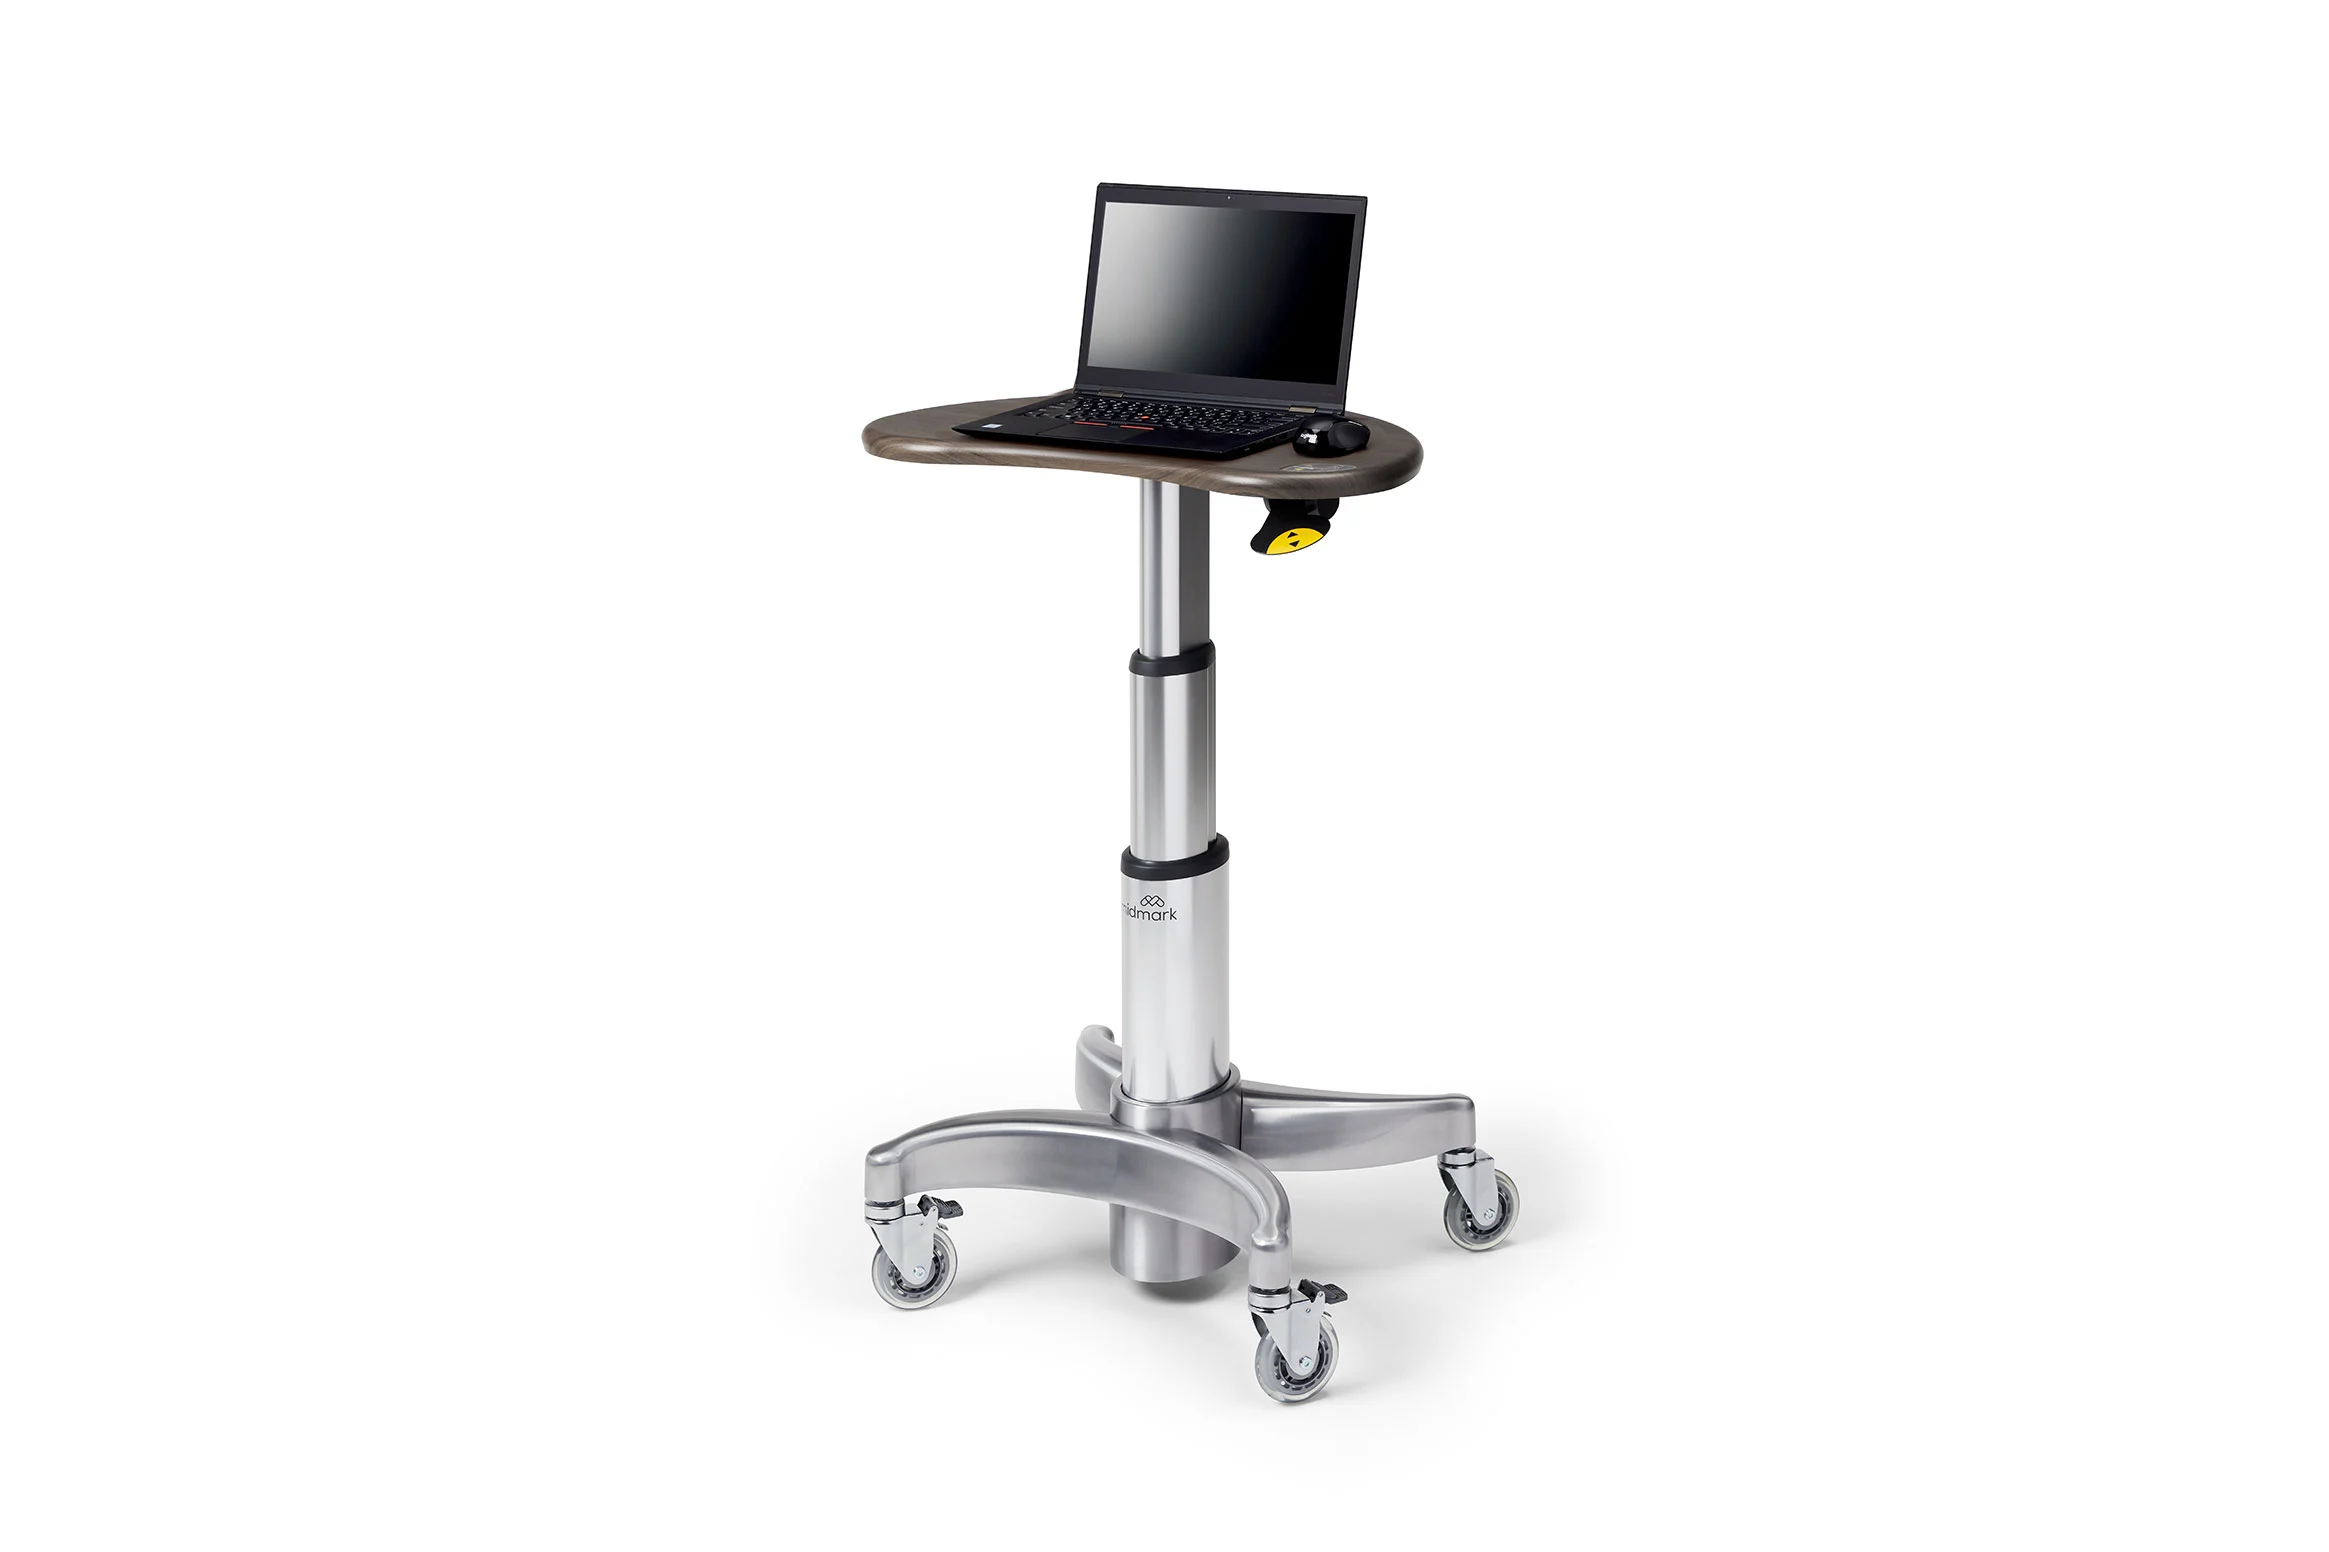 medical-products-workstations-6215-compact-kidney